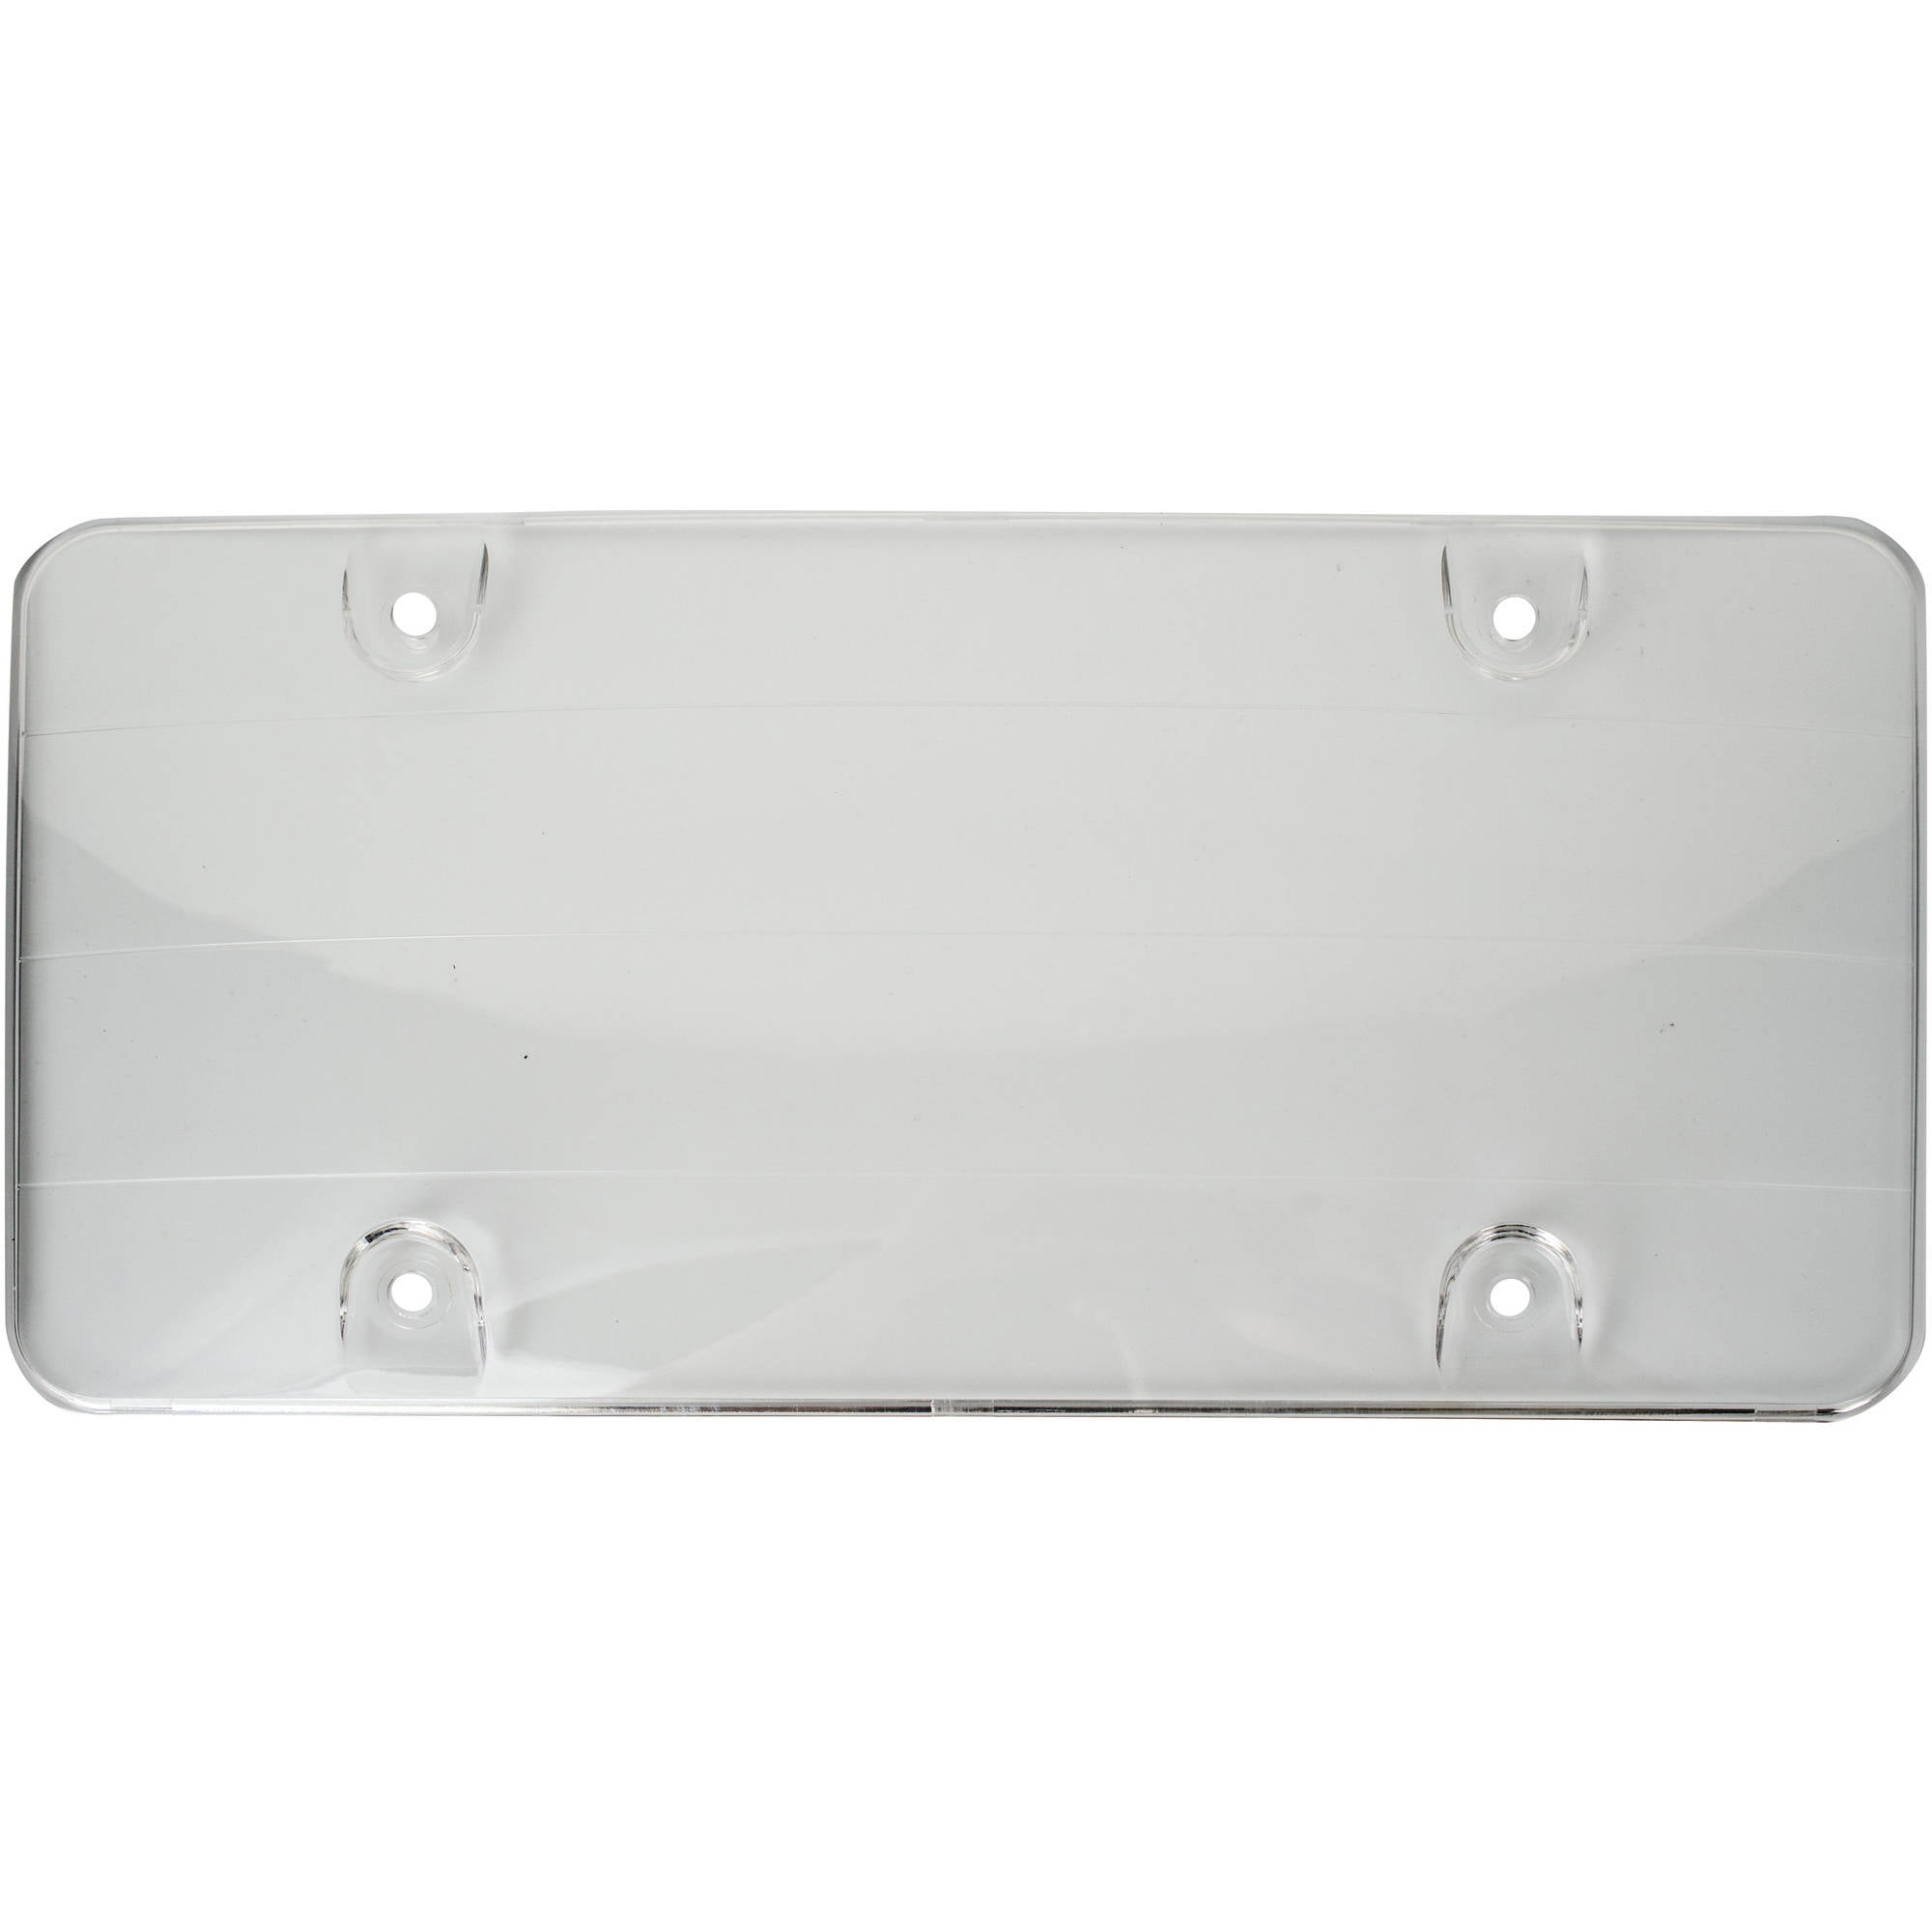 199307 - Clear Plate Cover 10-3/4 to 11 - Clear